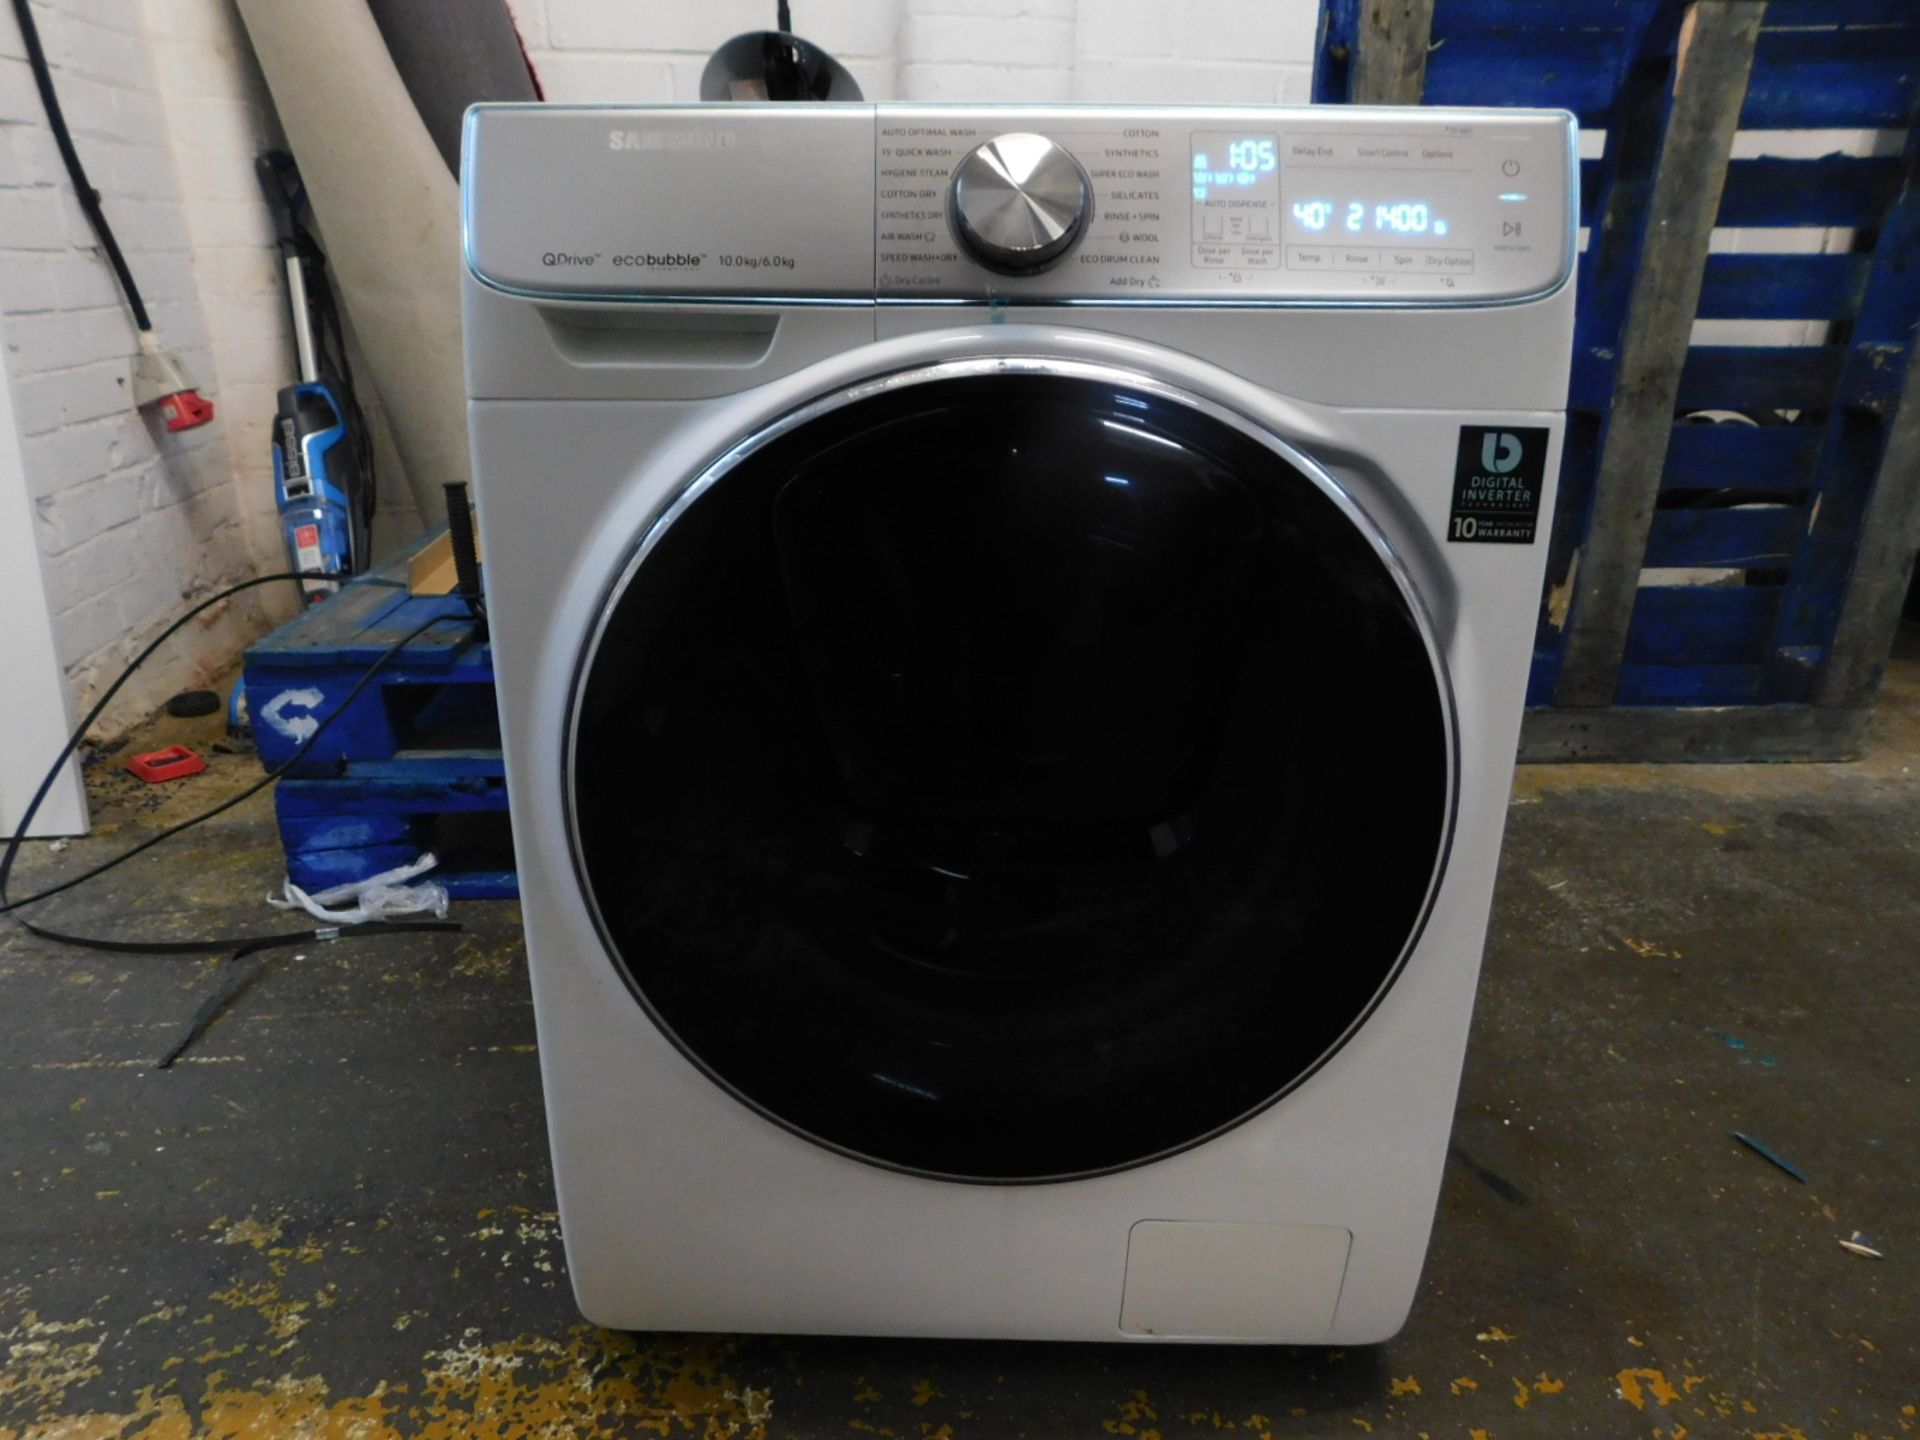 1 SAMSUNG WD10N84GNOA 10KG/ 6KG 1400RPM QDRIVE WASHER DRYER WITH ADDWASH RRP Â£1299 (POWERS ON)